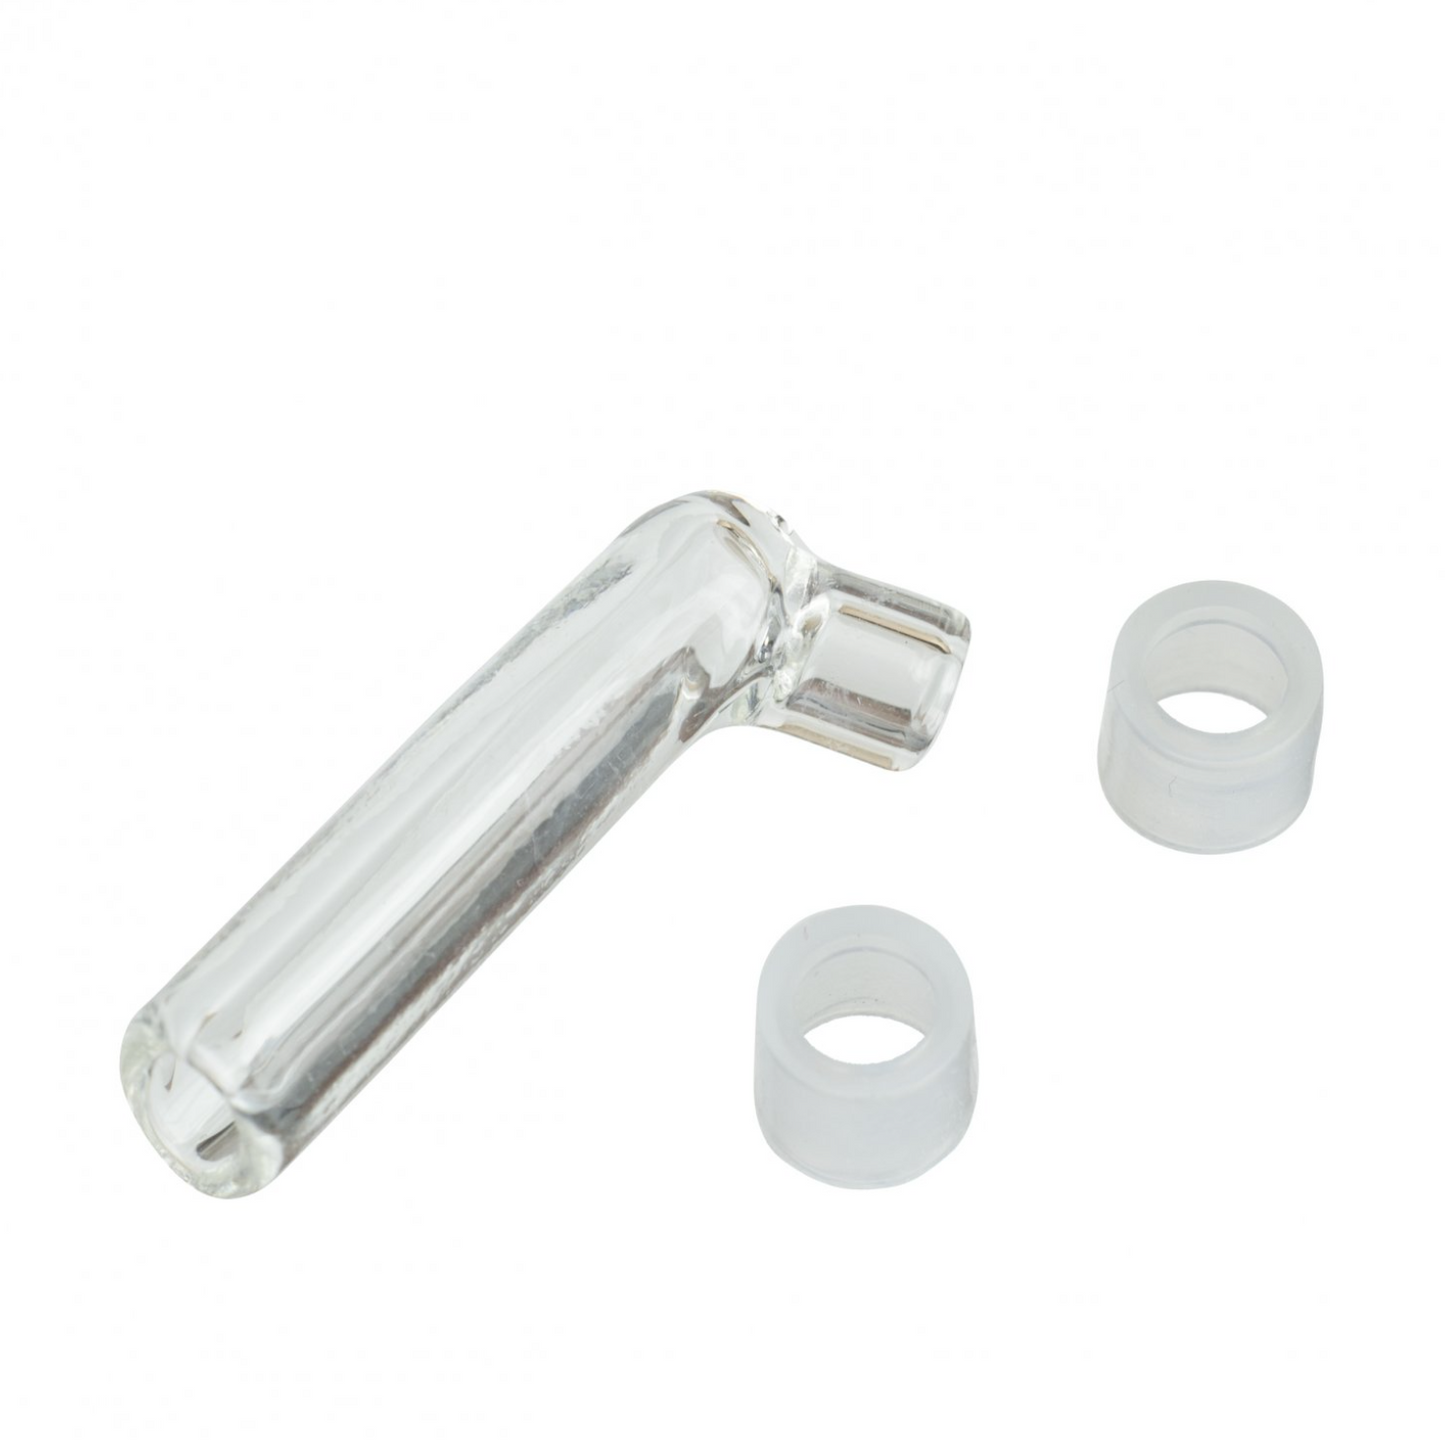 Easy Flow Glass Mouthpiece for Crafty/Mighty